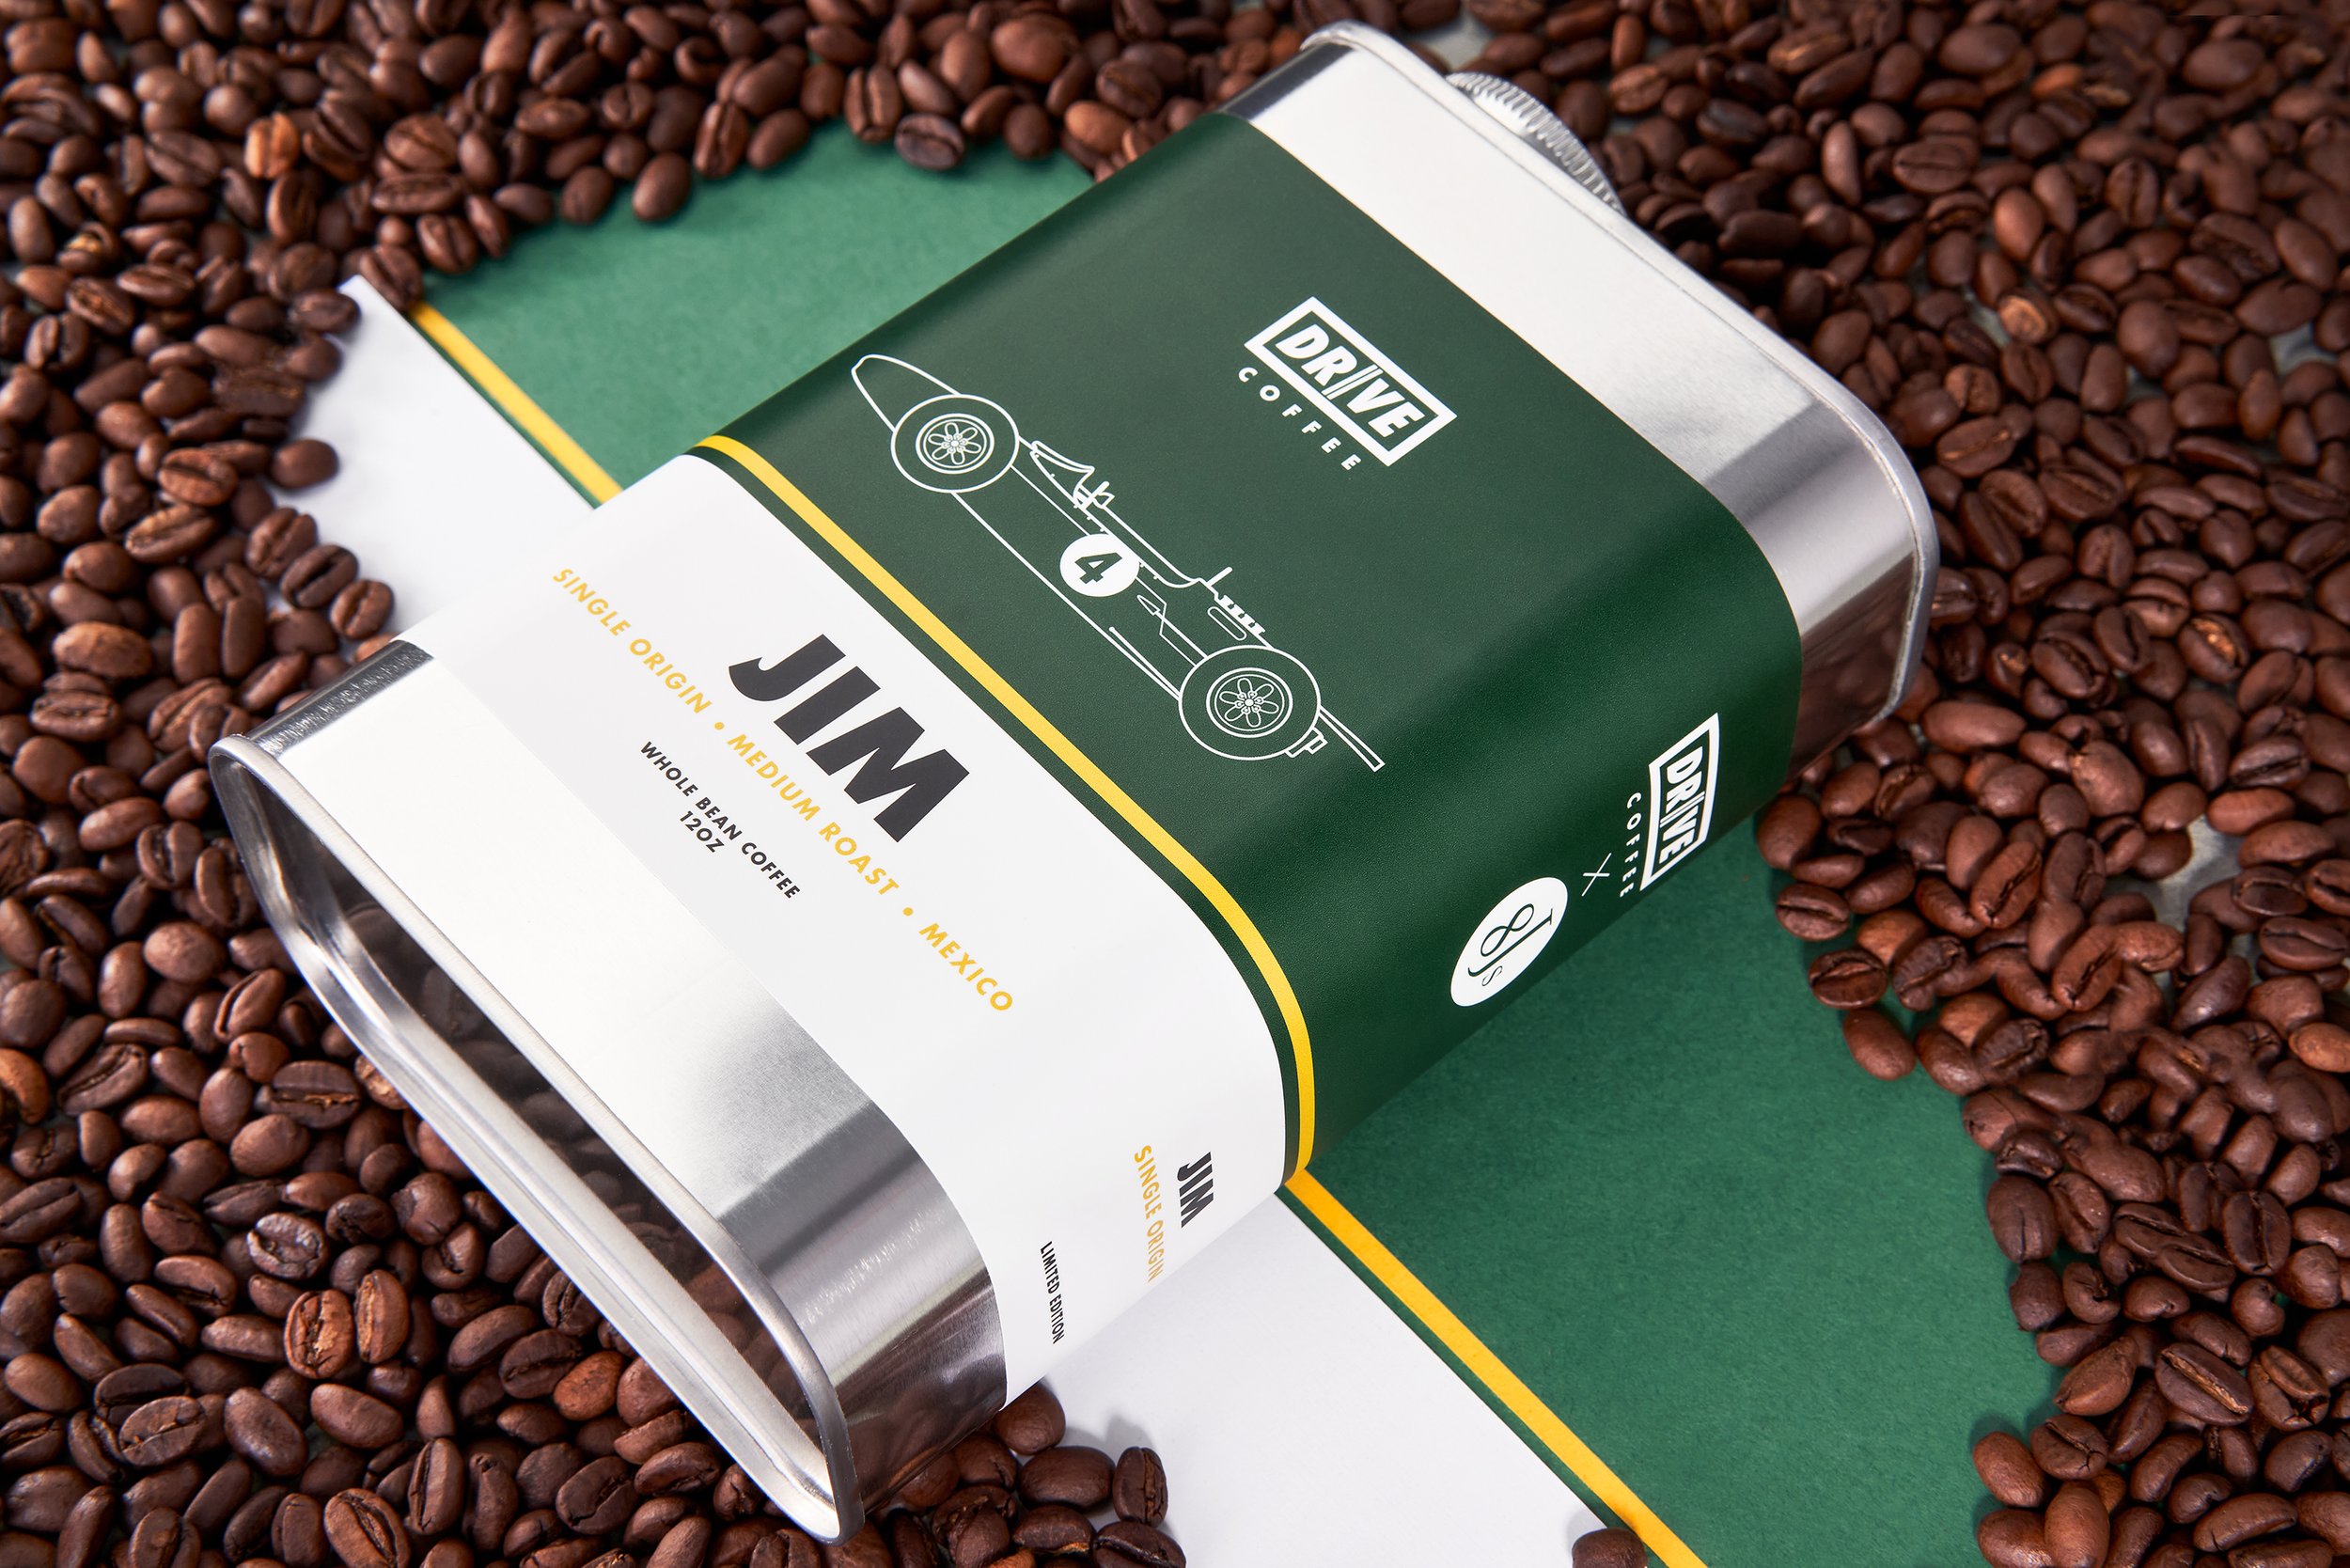 Drive Coffee, Jim edition, with matching surface and coffee beans, Product Photography, Ben Macri, Maine